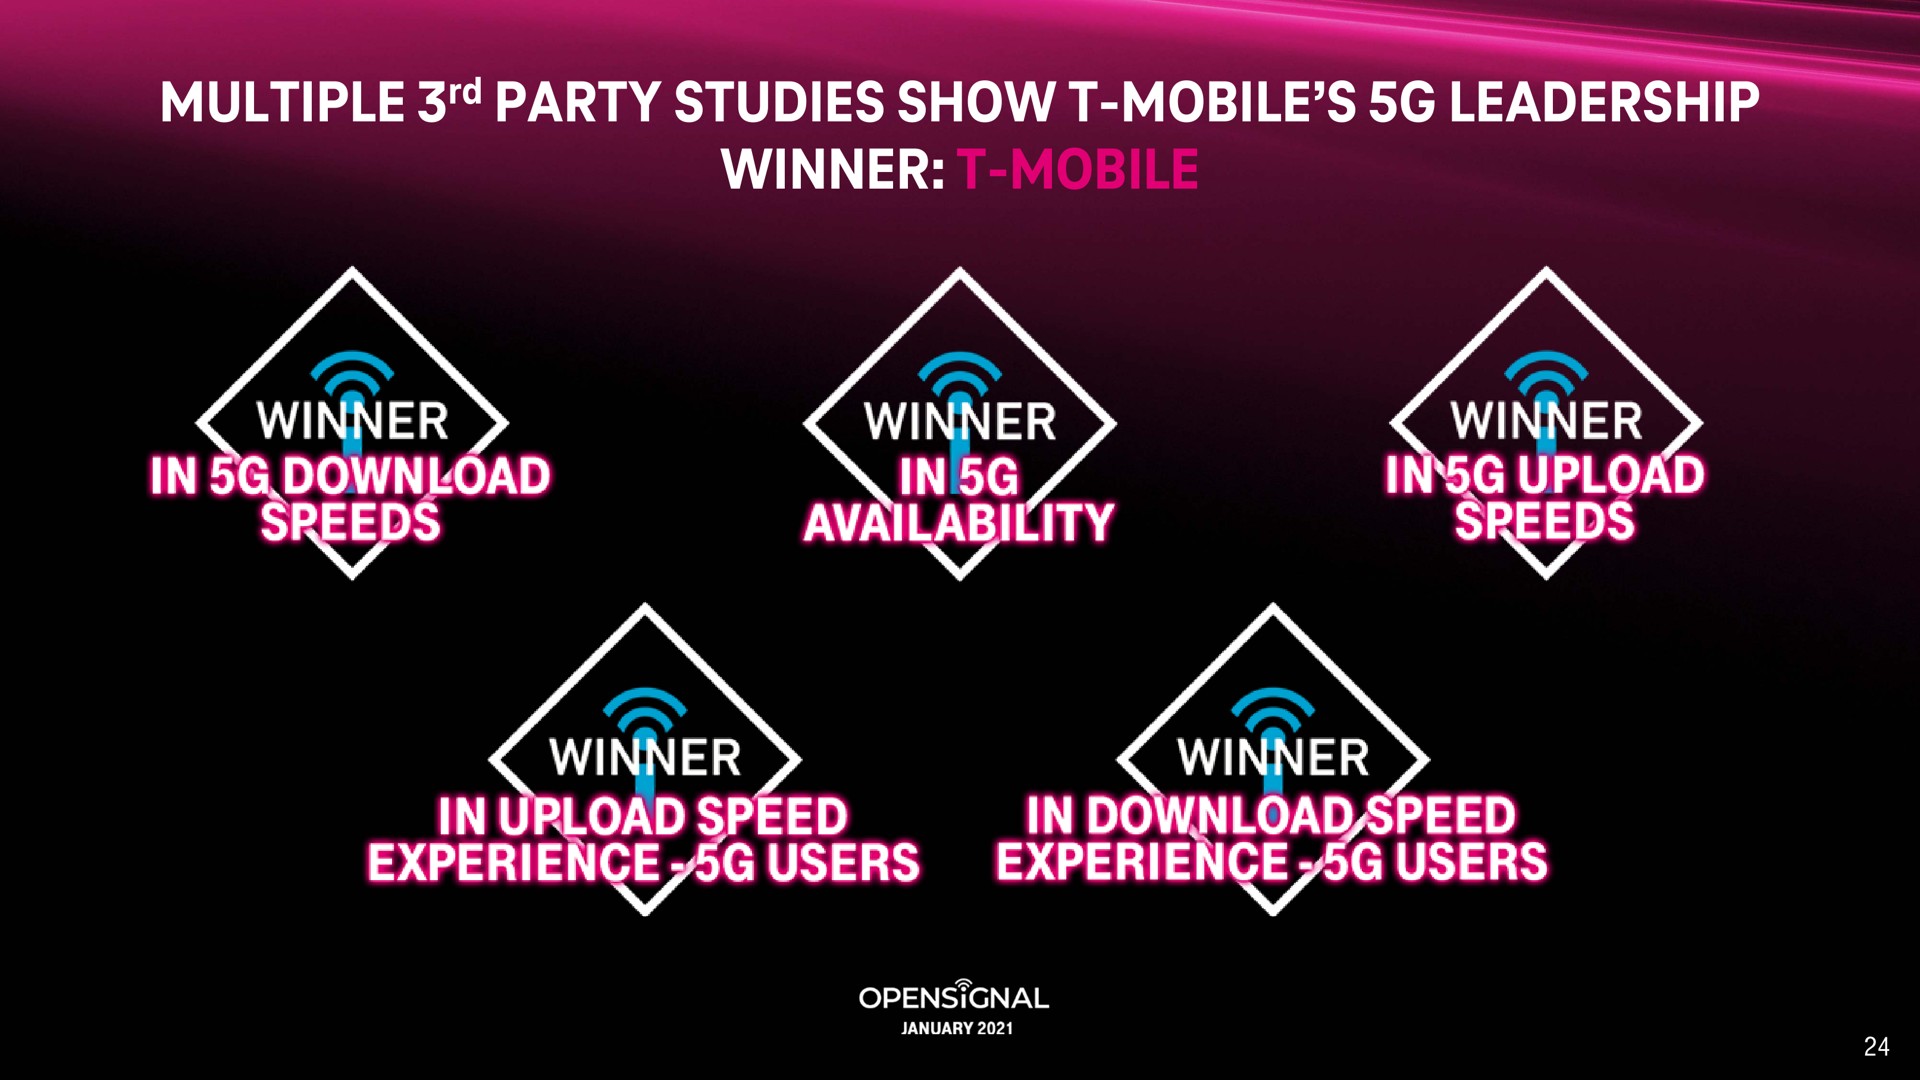 multiple party studies show mobile leadership winner mobile in load speed experience users in experience users | T-Mobile